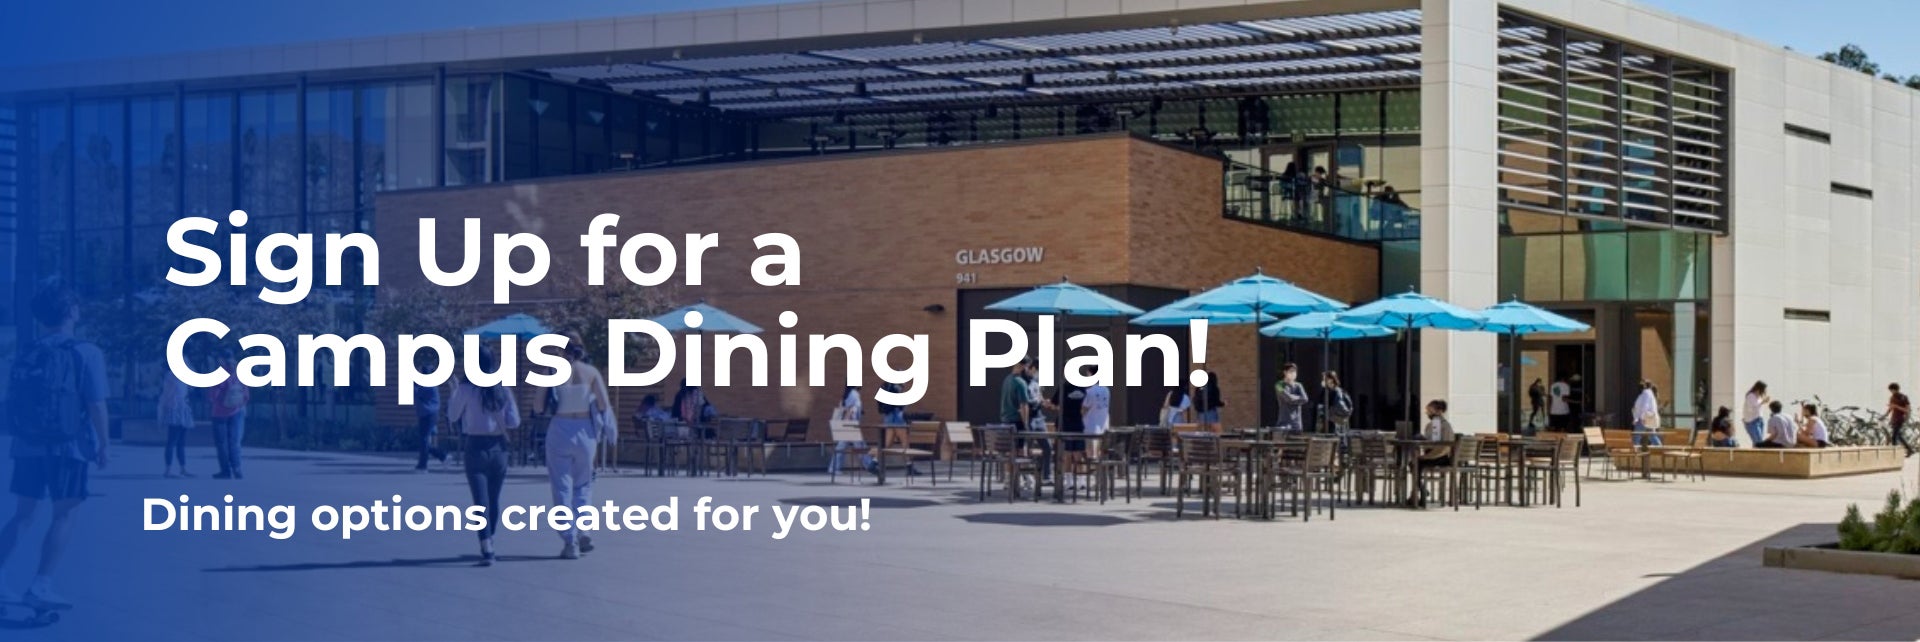 Sign up for campus dining plan, dining options created for you